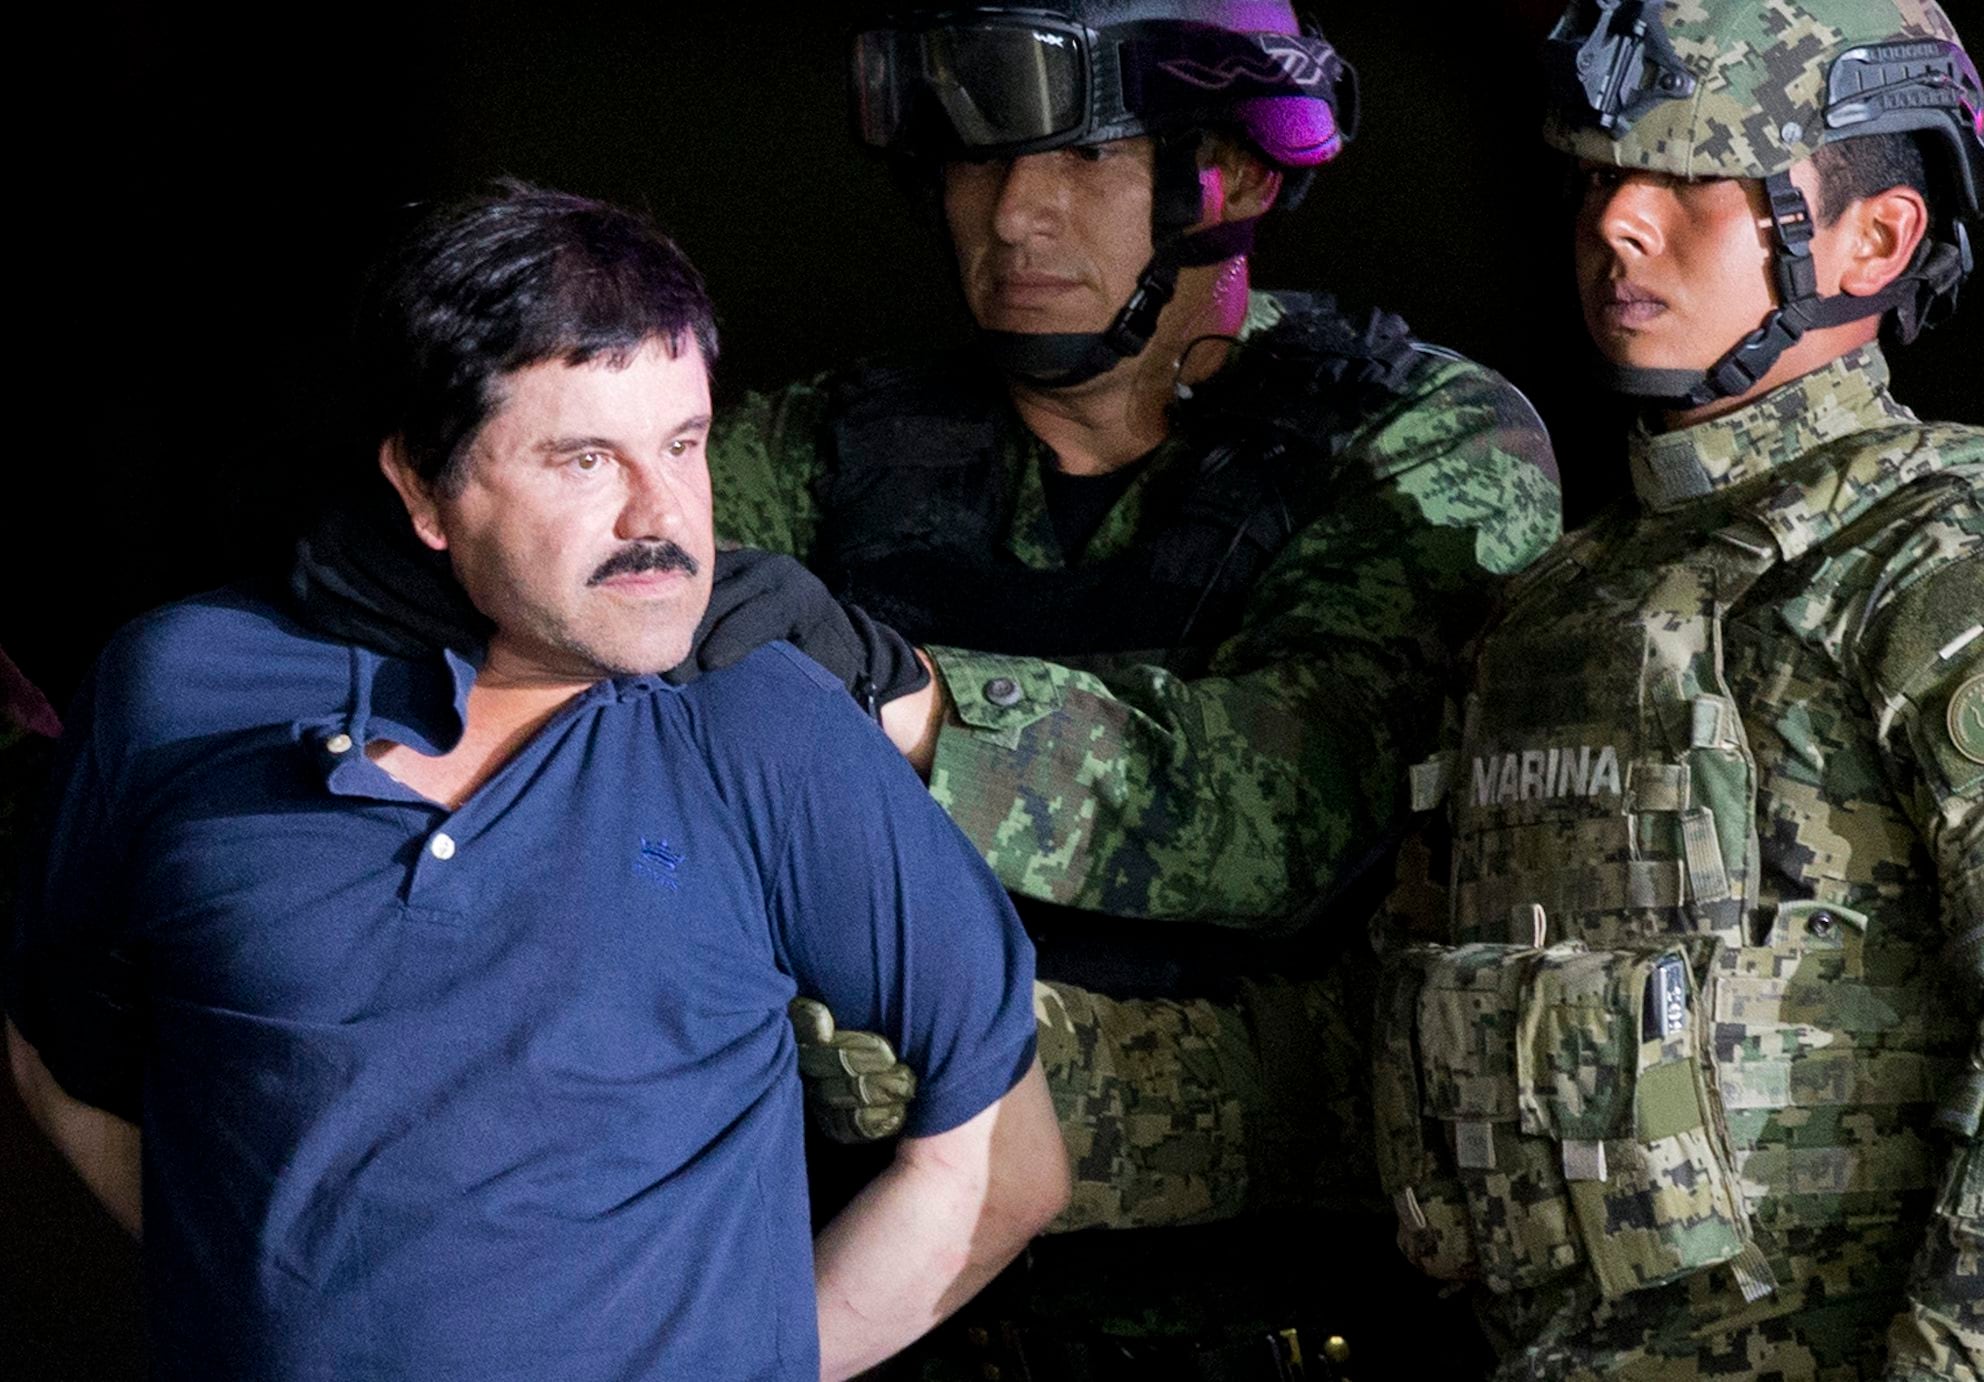 Joaquin "El Chapo" Guzman is made to face the press as he is escorted to a helicopter in handcuffs by Mexican soldiers and marines at a federal hangar in Mexico City, Mexico, Friday, Jan. 8, 2016. Mexican President Enrique Pena Nieto announced that Guzman had been recaptured six months after escaping from a maximum security prison. (AP Photo/Eduardo Verdugo)